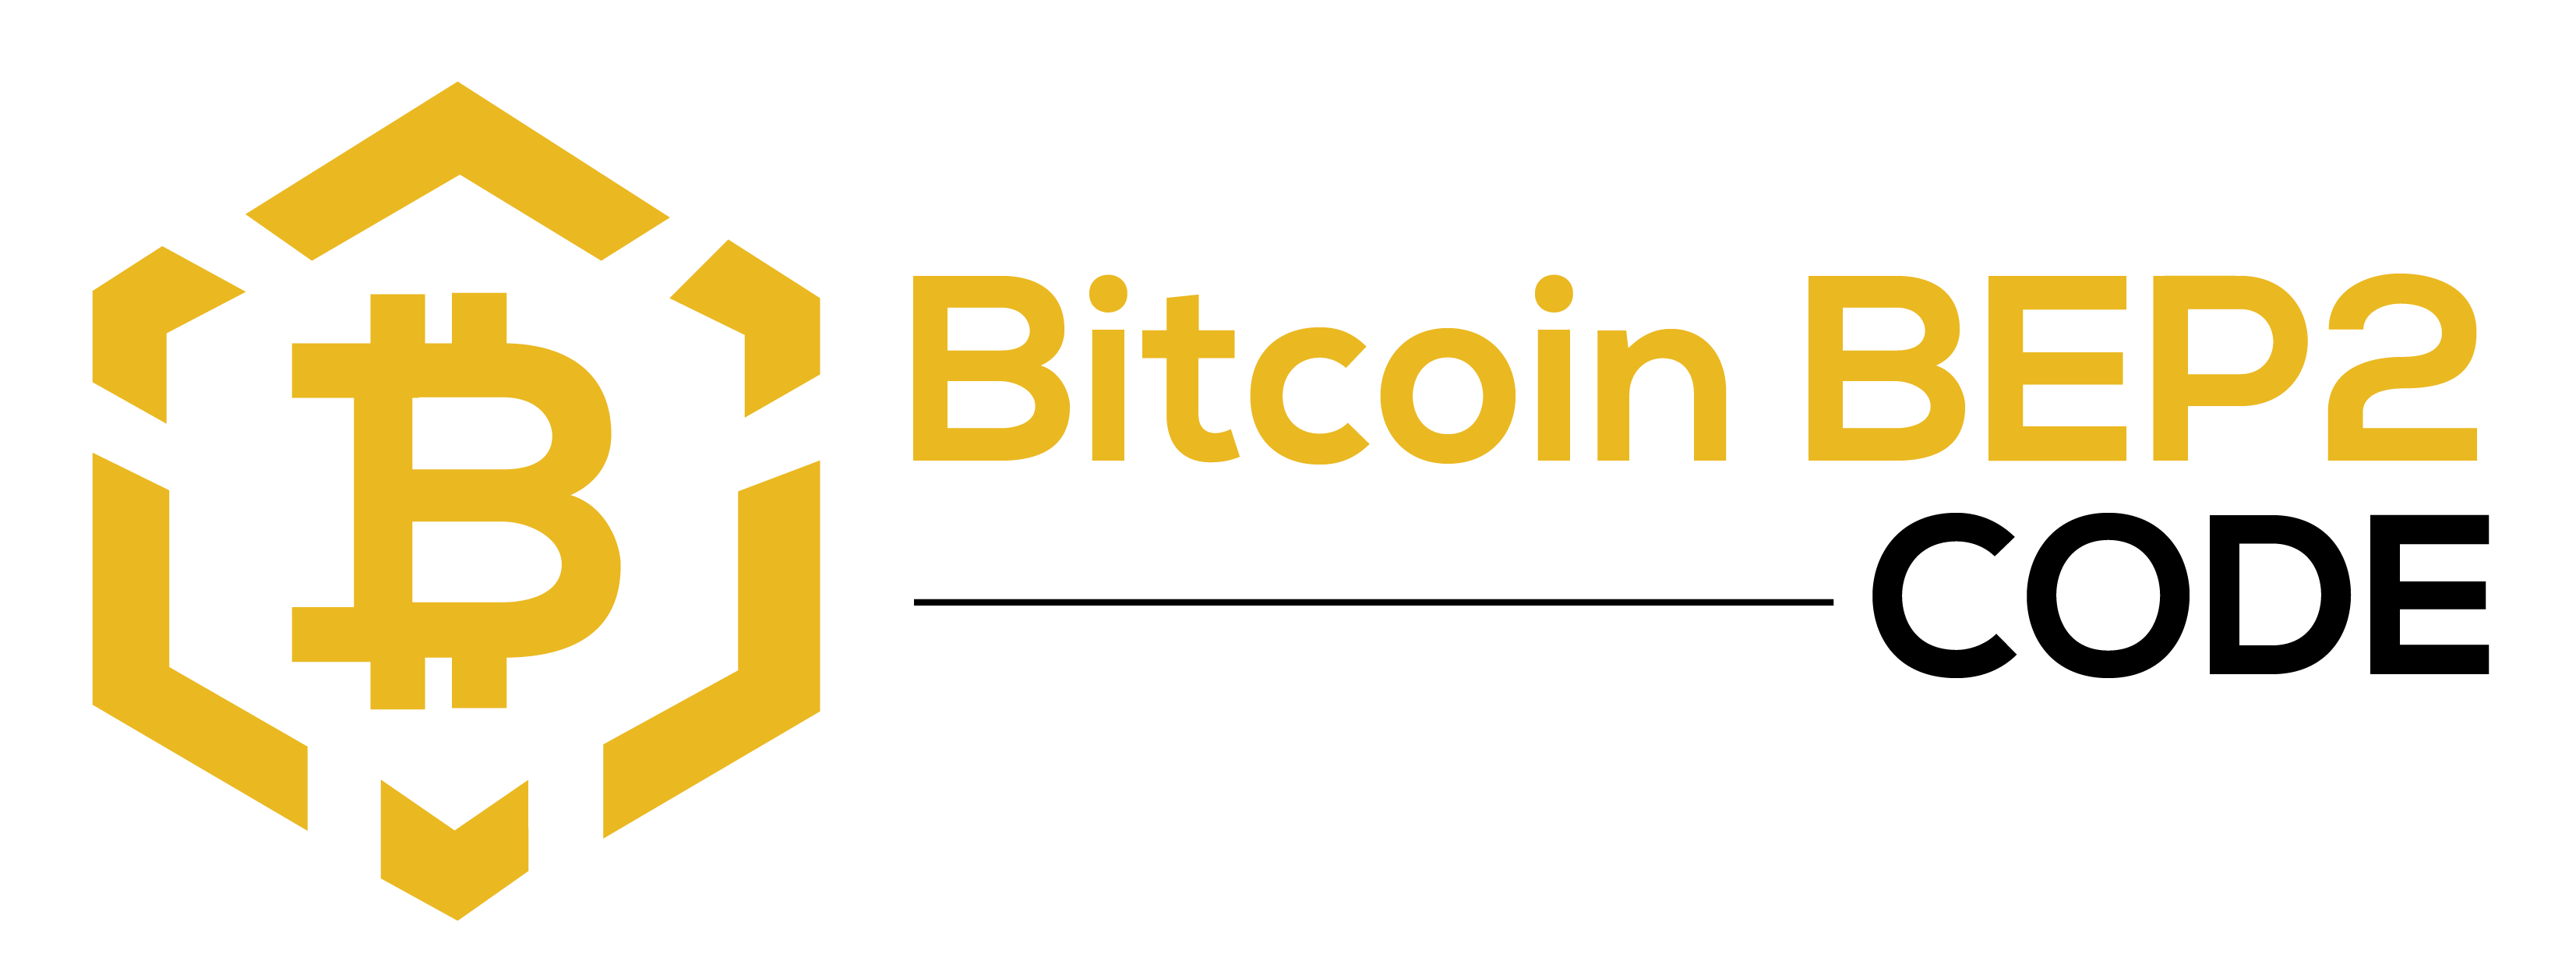 Bitcoin BEP2 Code - BE A MEMBER OF THE Bitcoin BEP2 Code COMMUNITY